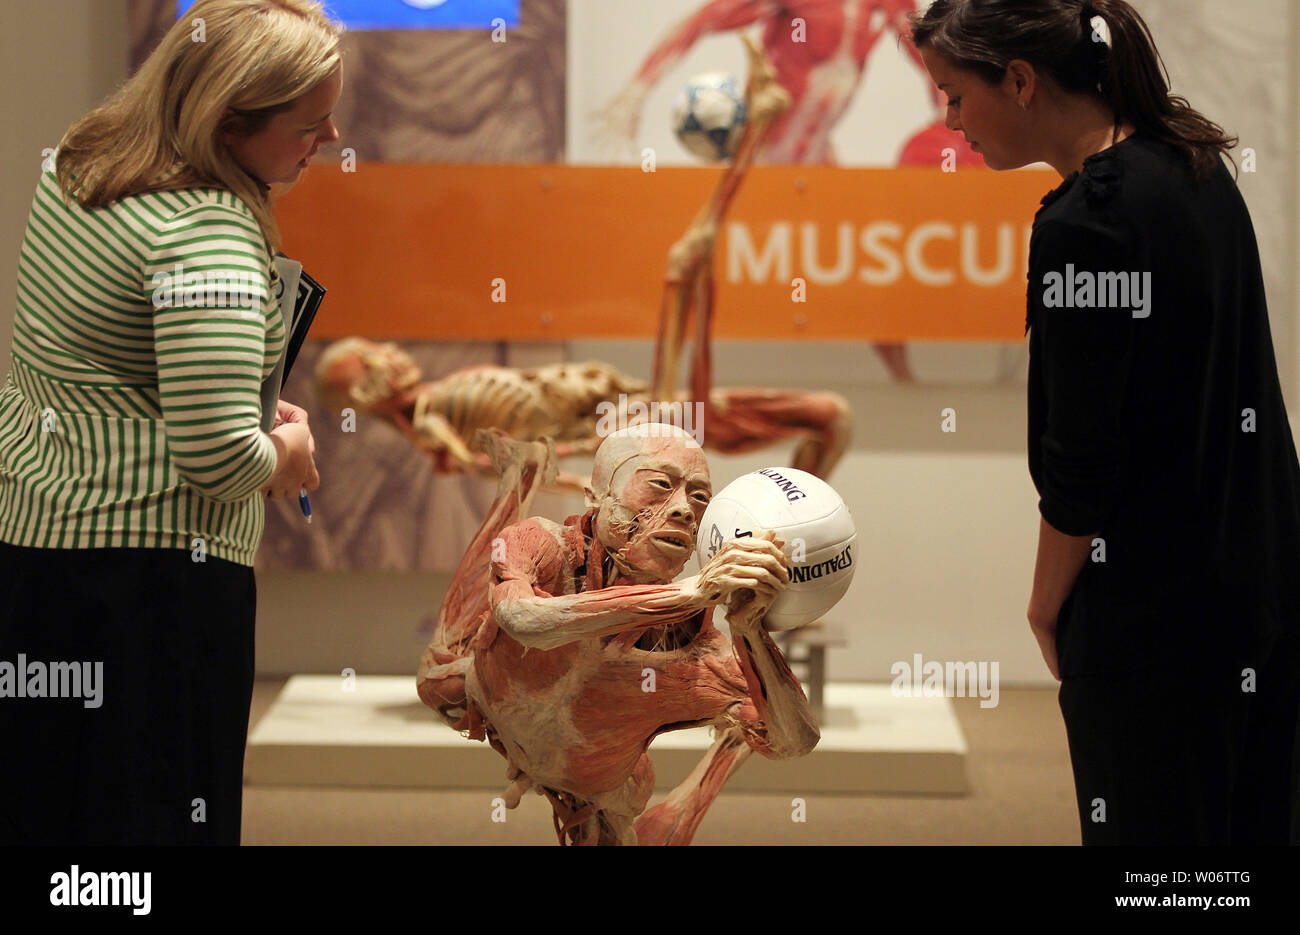 Workers make checks on displays as final preparations are made just days before the opening of the 'Bodies' exhibit in St. Louis on September 30, 2010.  The exhibition, which will display real human bodies, will show skeletal, muscular, reproductive, respiratory, circulatory and other systems of the body.    UPI/Bill Greenblatt Stock Photo